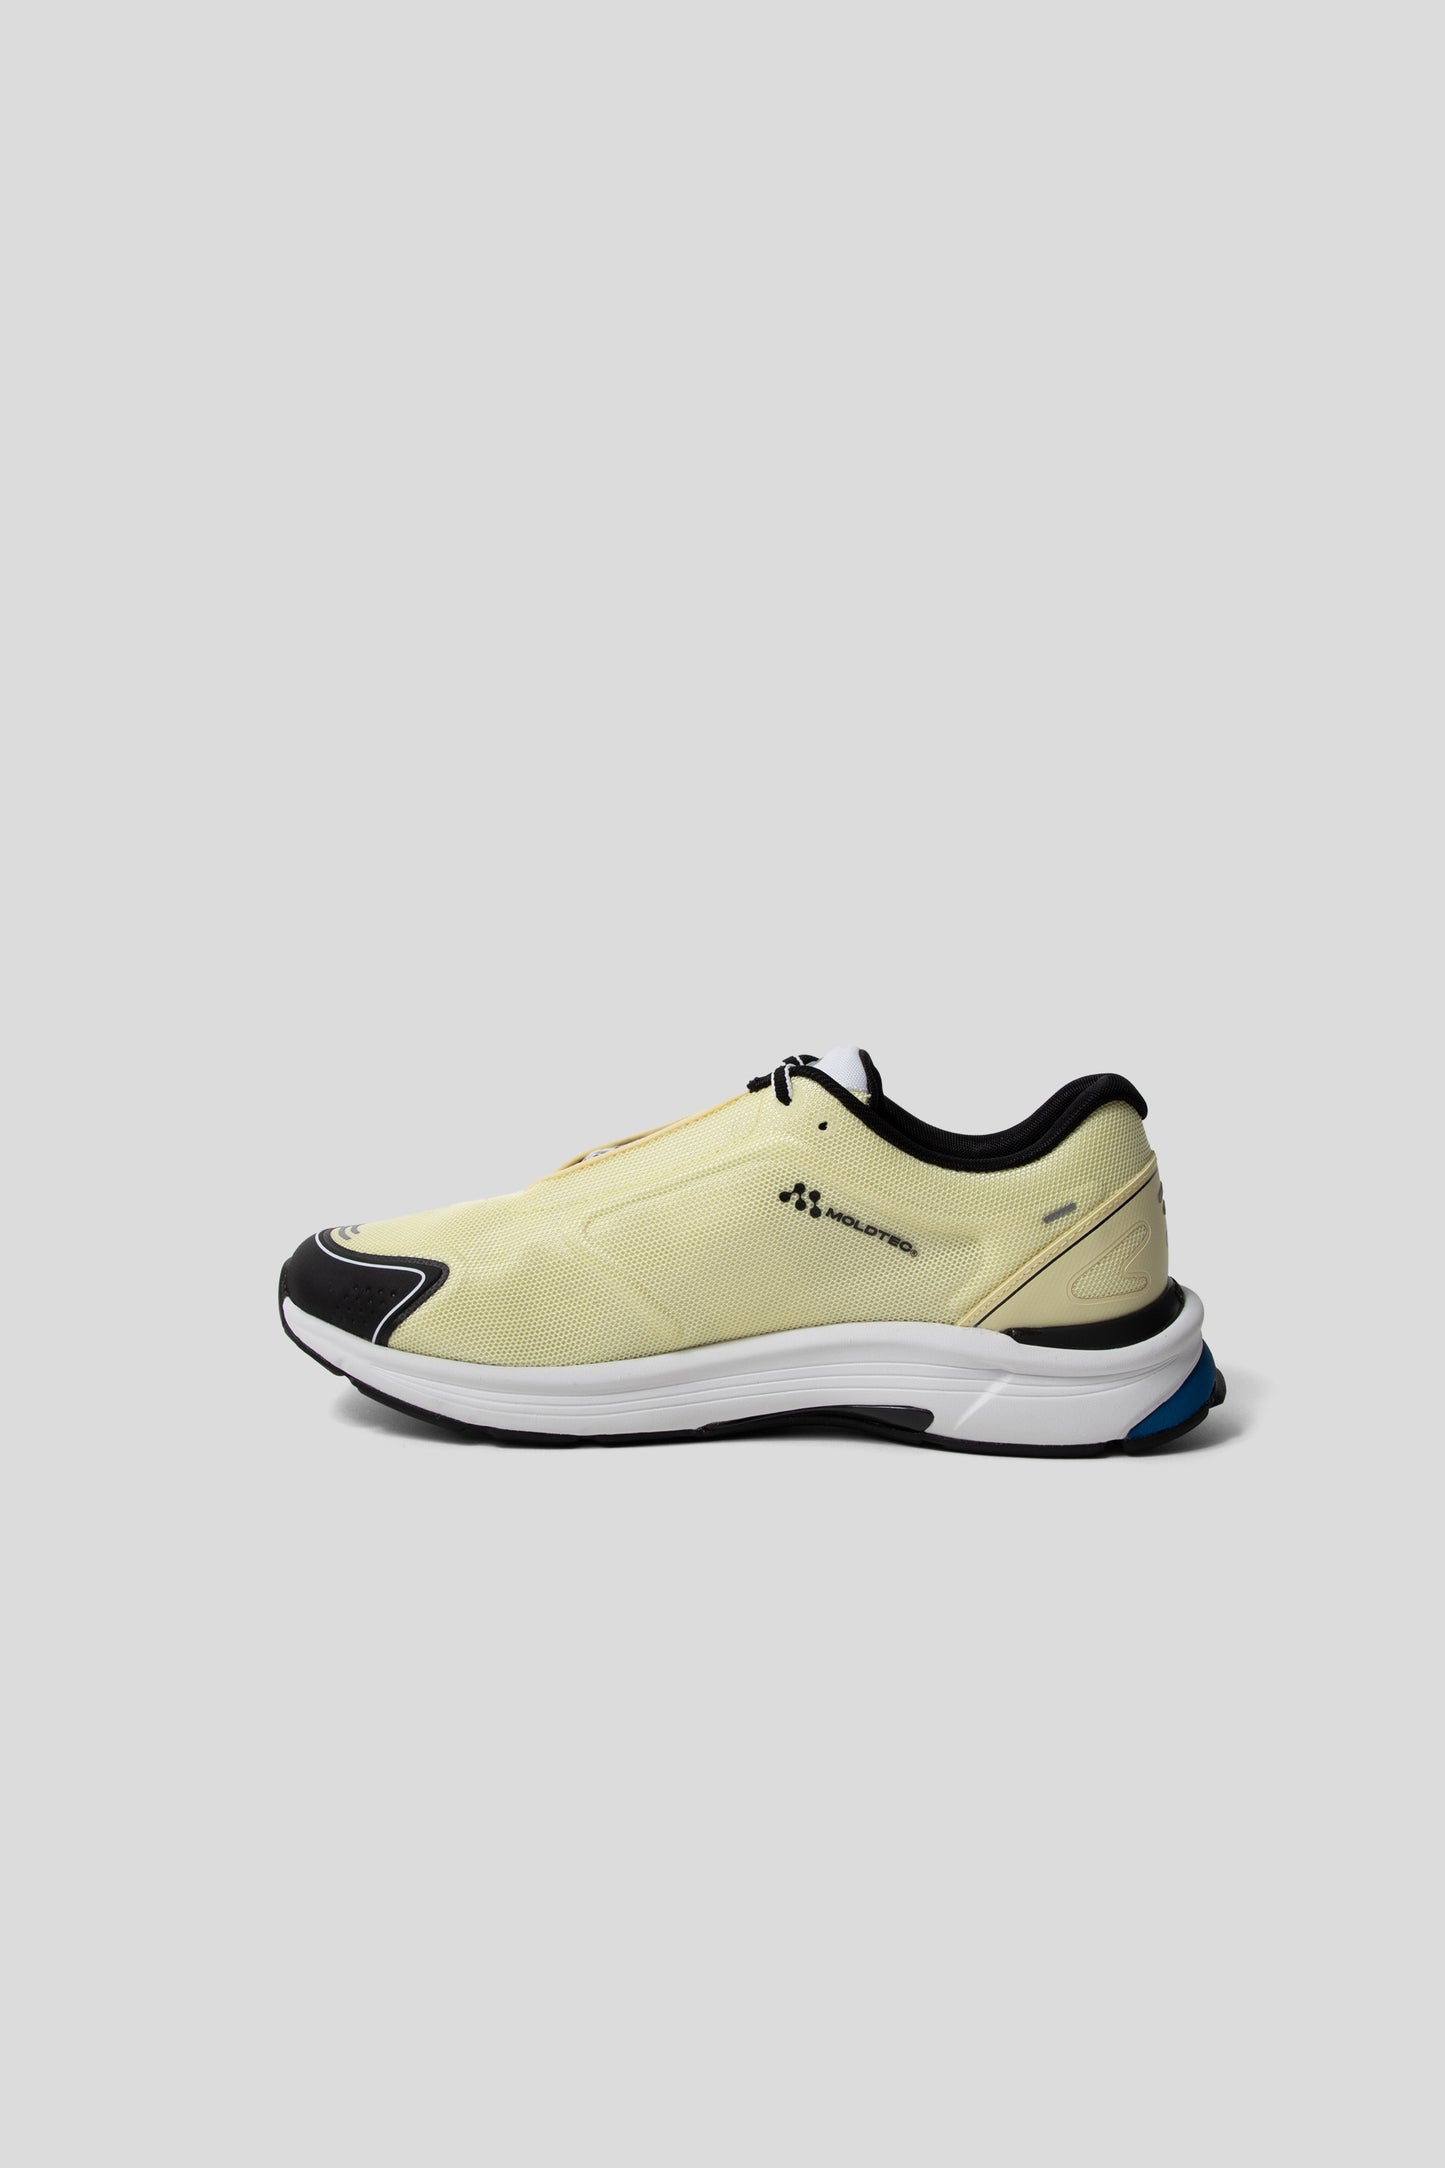 Athletic FTWR One Remstrd sneaker in Wax Yellow and Black